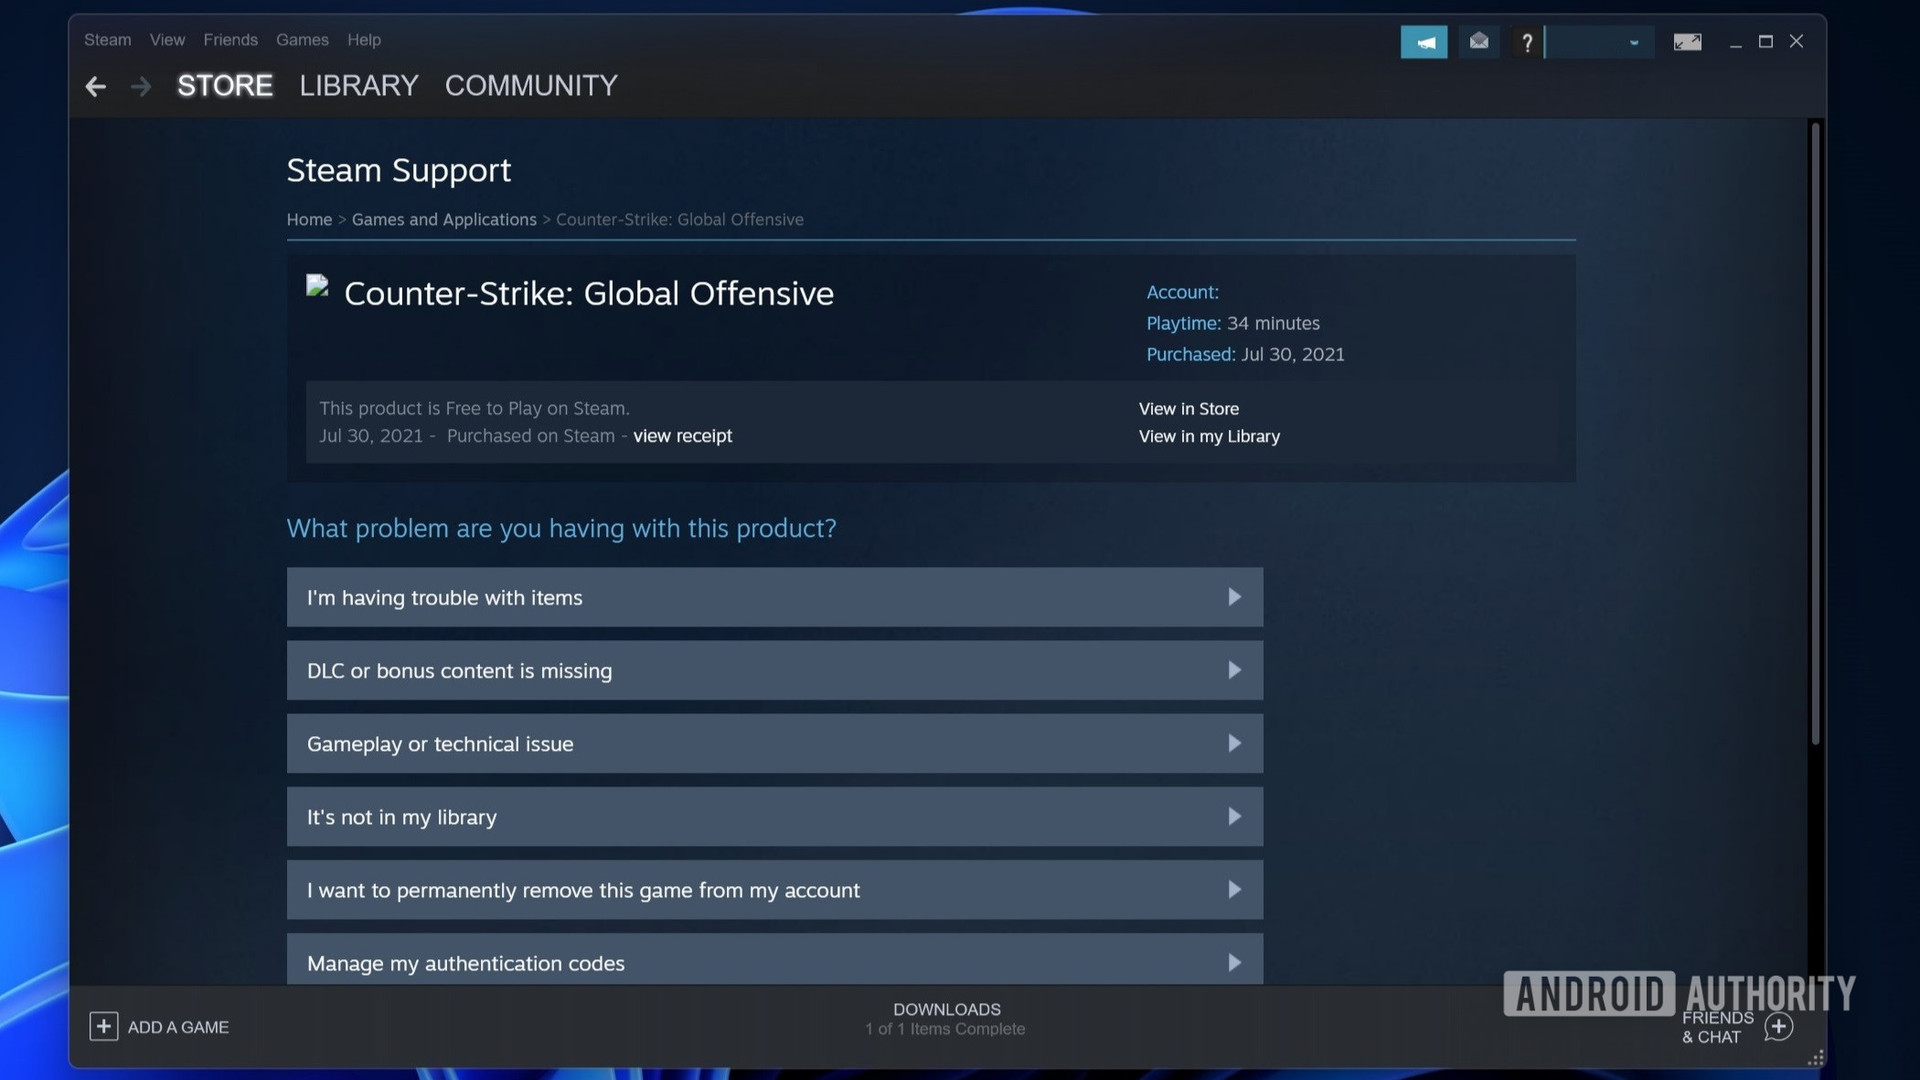 Steam support game screen